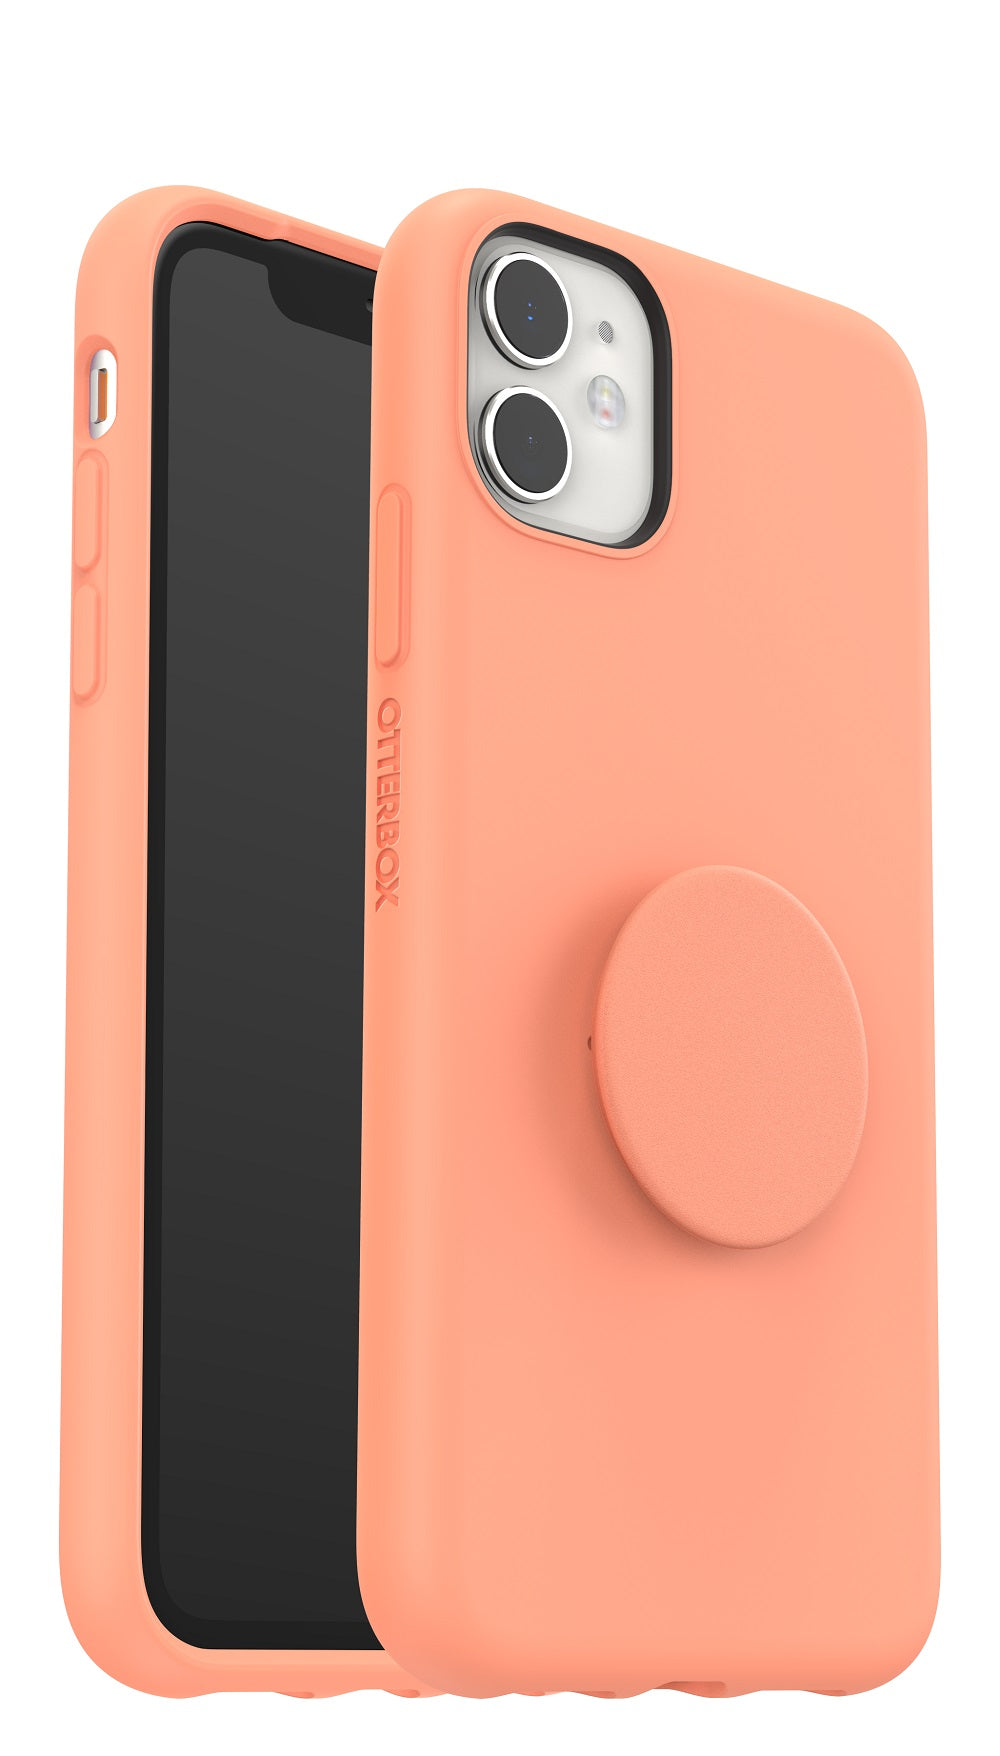 OtterBox + POP Ultra Slim Soft Touch Case for Apple iPhone 11 - Melon Twist (New)